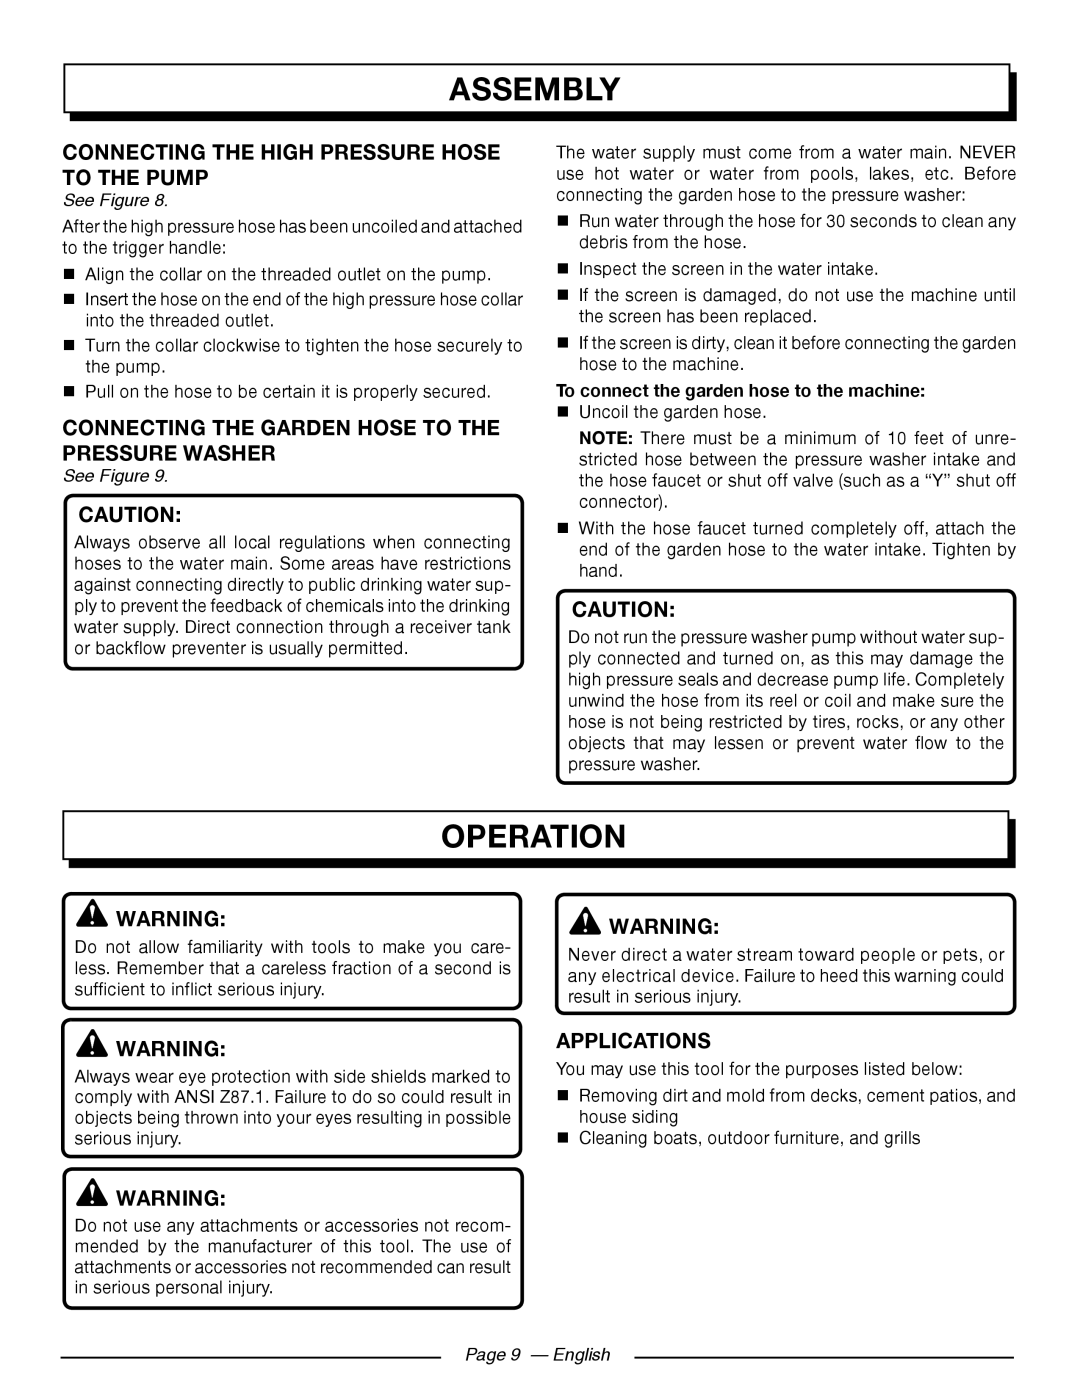 Homelite UT80522 Operation, Connecting The High Pressure Hose To The Pump, Applications, Page 9 - English, Assembly 